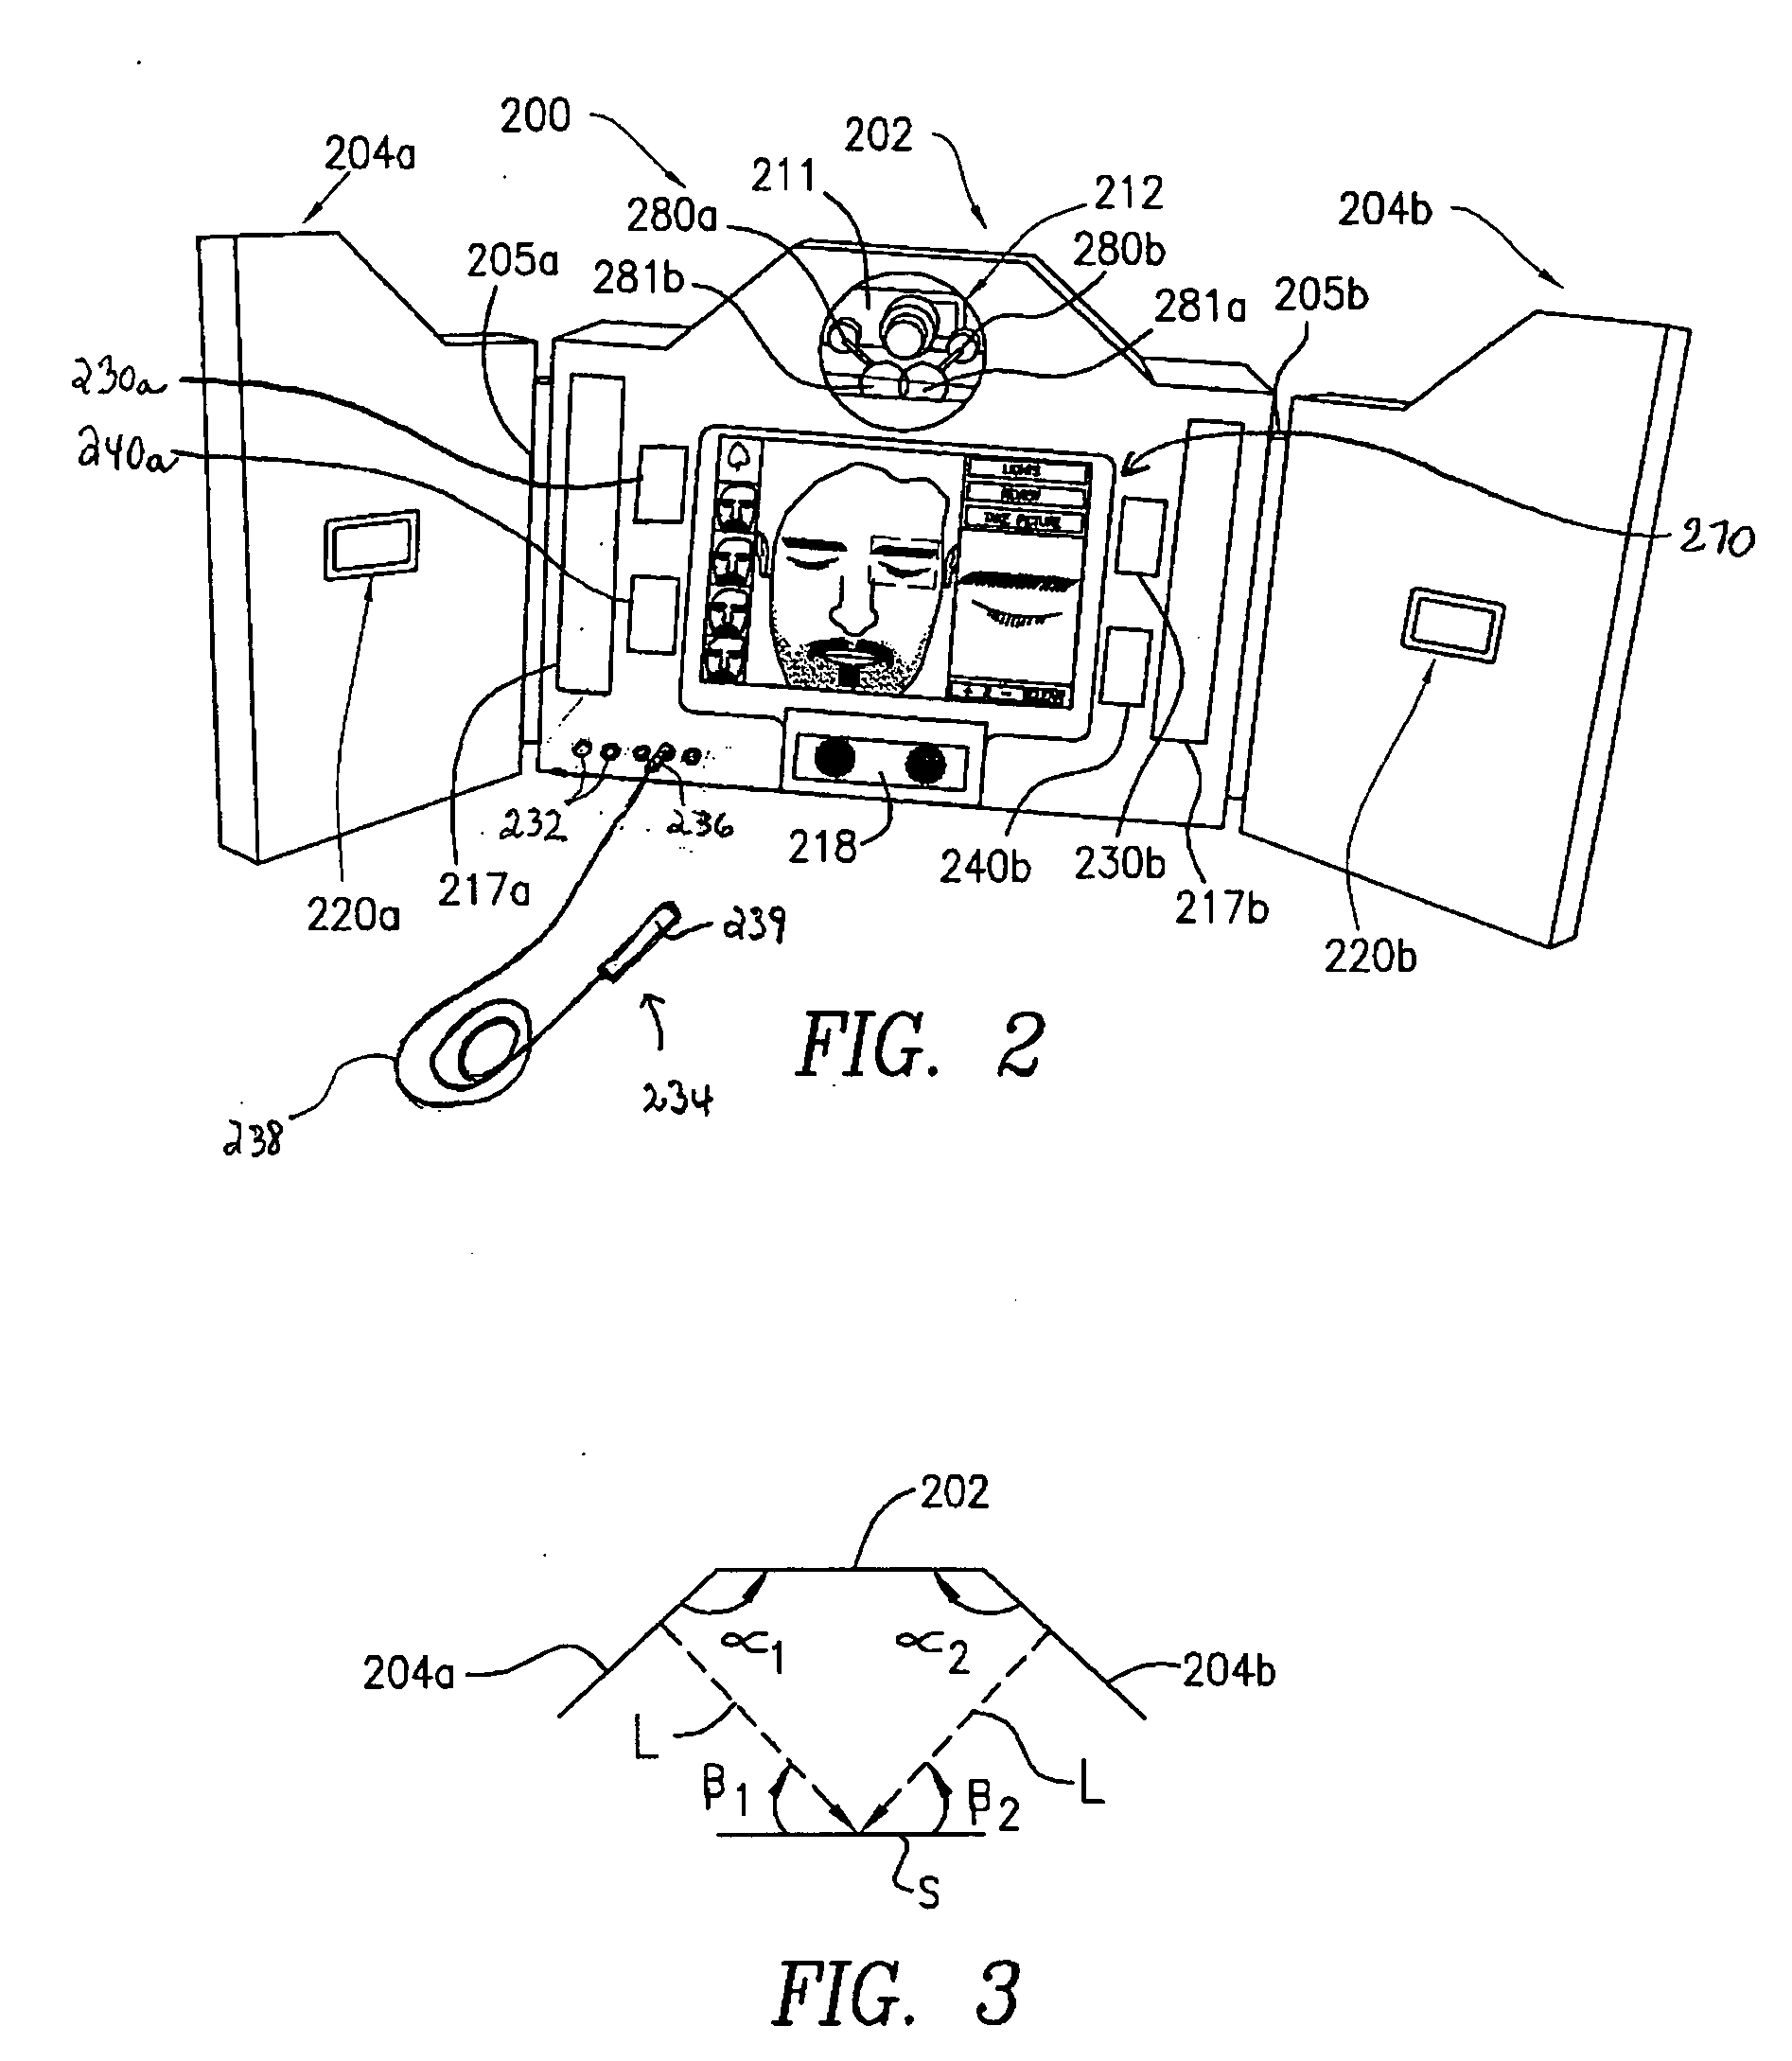 Skin Imaging system with probe